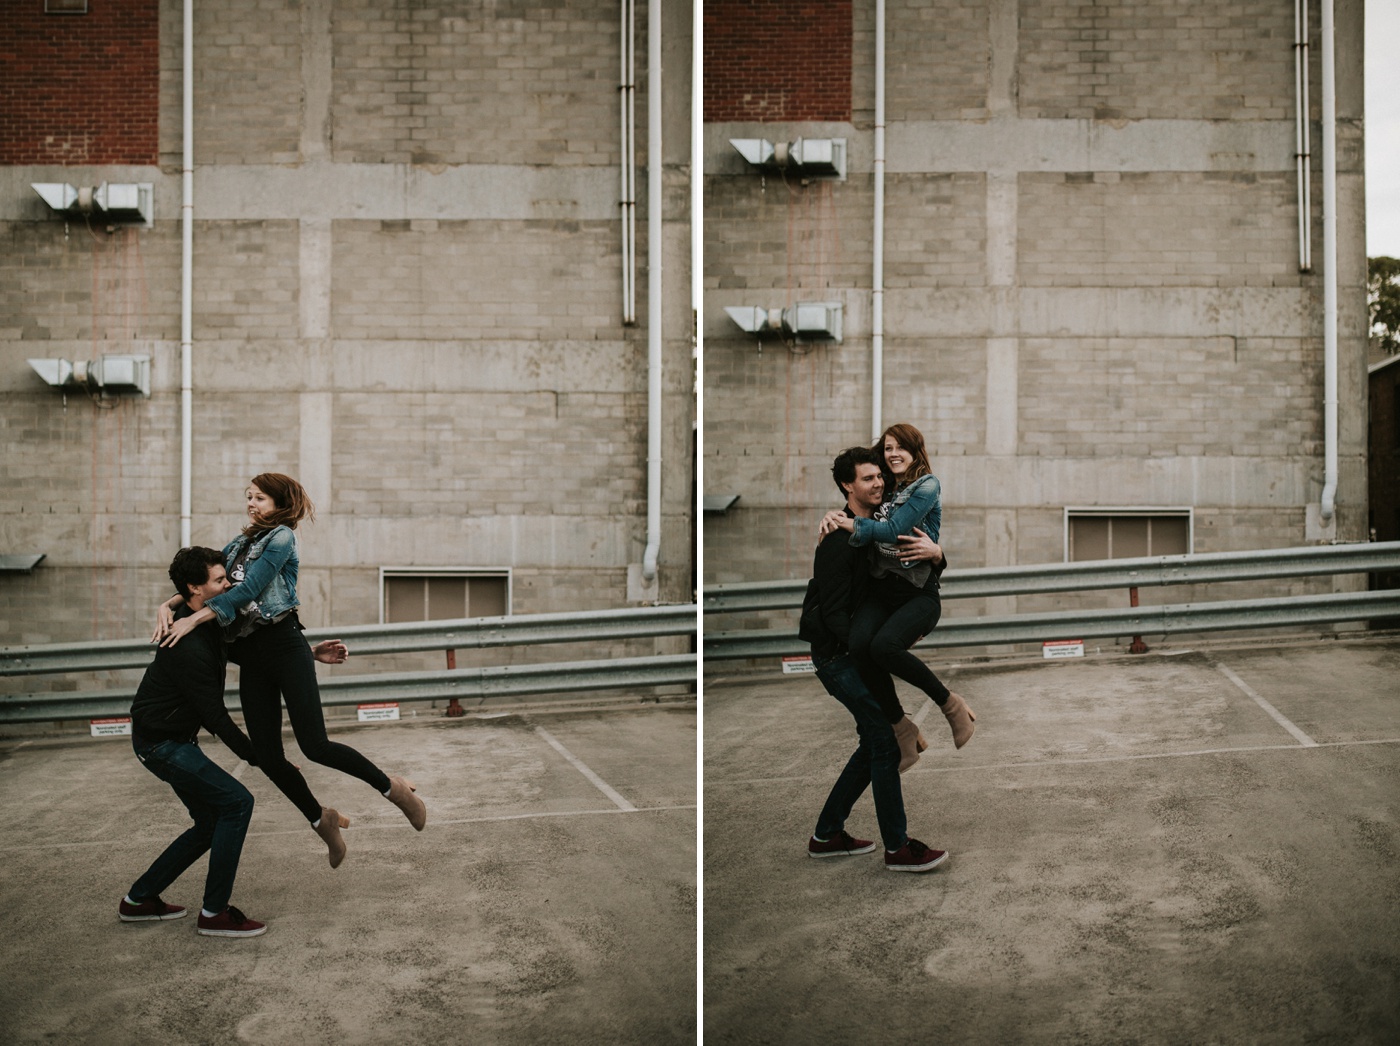 heli-alex_melbourne-fun-candid-gritty-relaxed-city-urban-couples-engagement-session_melbourne-wedding-photography_25